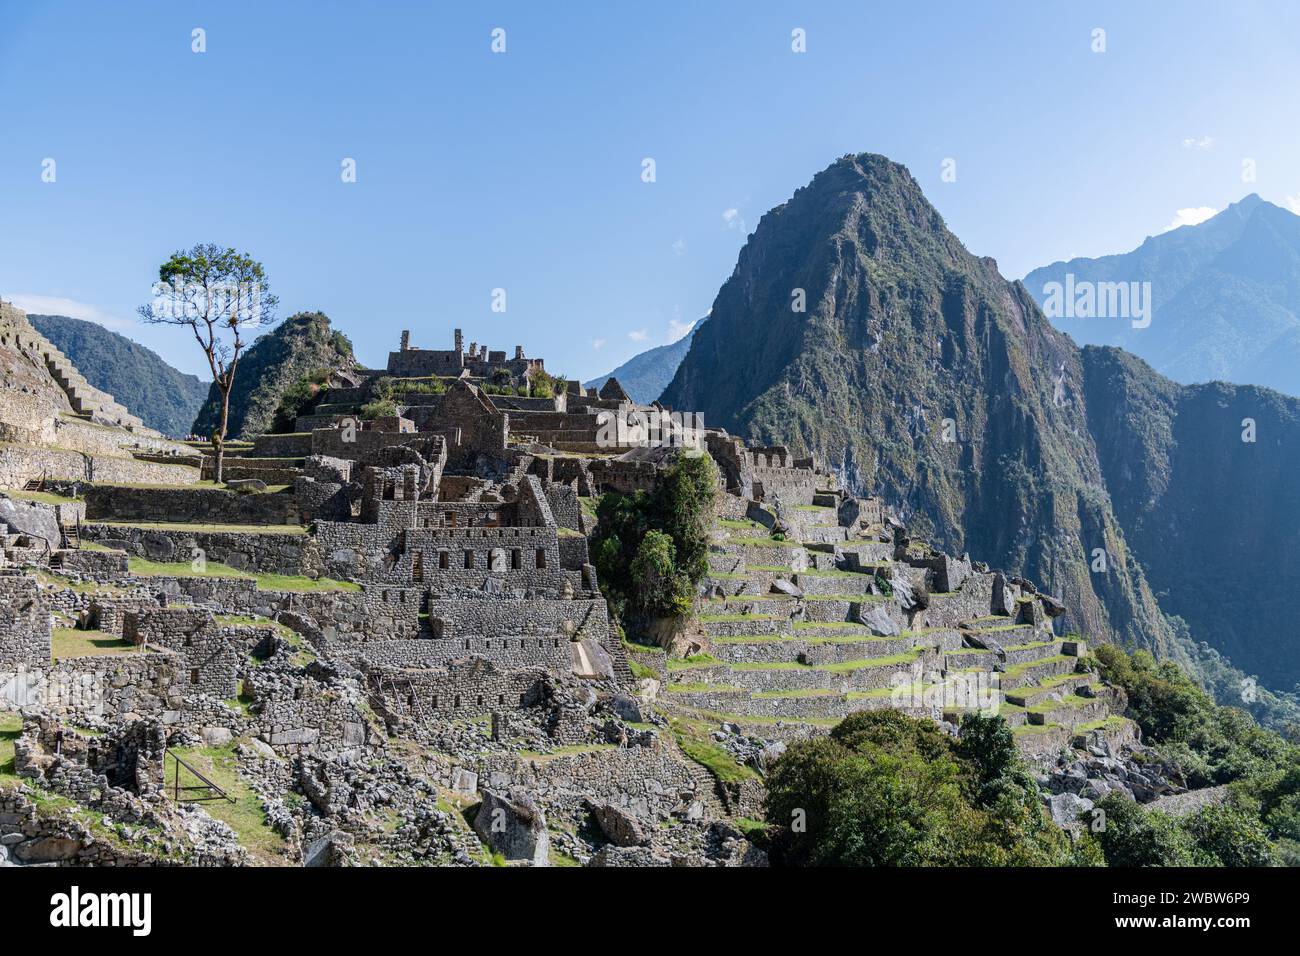 A view of the Machu Picchu citadel ruins and Huayna Picchu mountain in the Sacred Valley in Peru Stock Photo